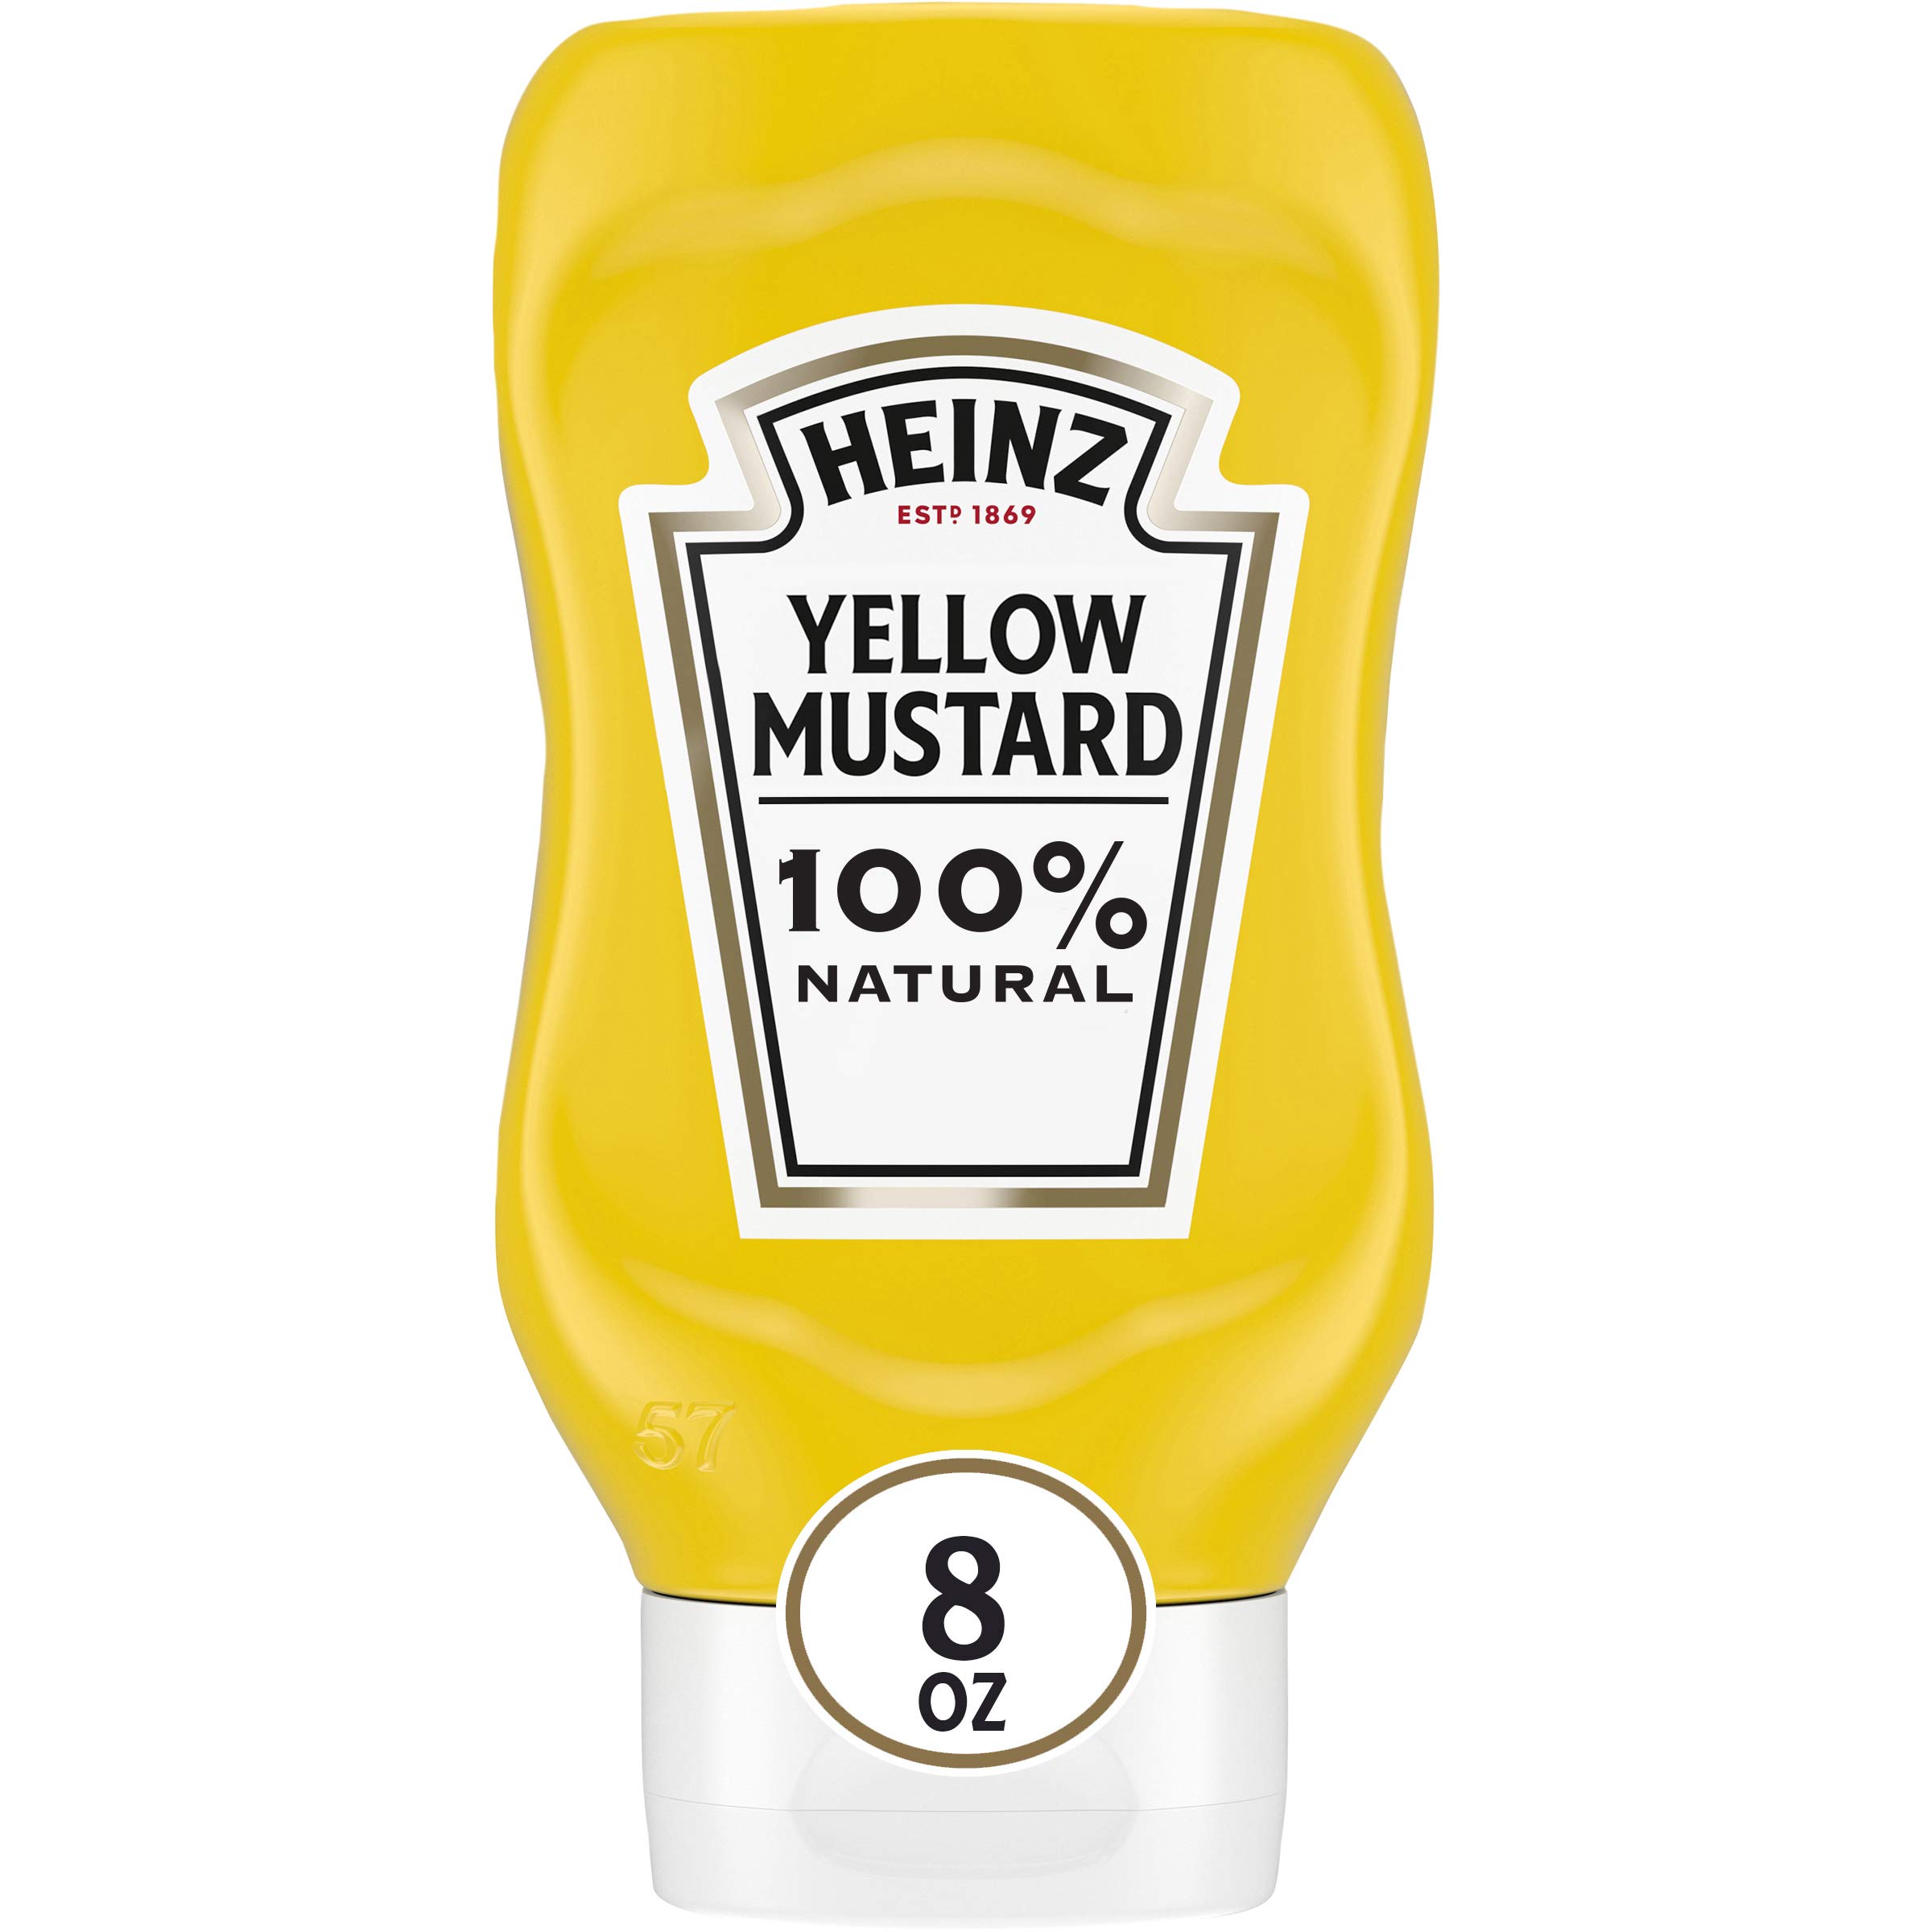 8-Oz Heinz Yellow Mustard Bottle $1.08, 20-Oz $2.13 w/ S&S + Free Shipping w/ Prime or on orders over $35